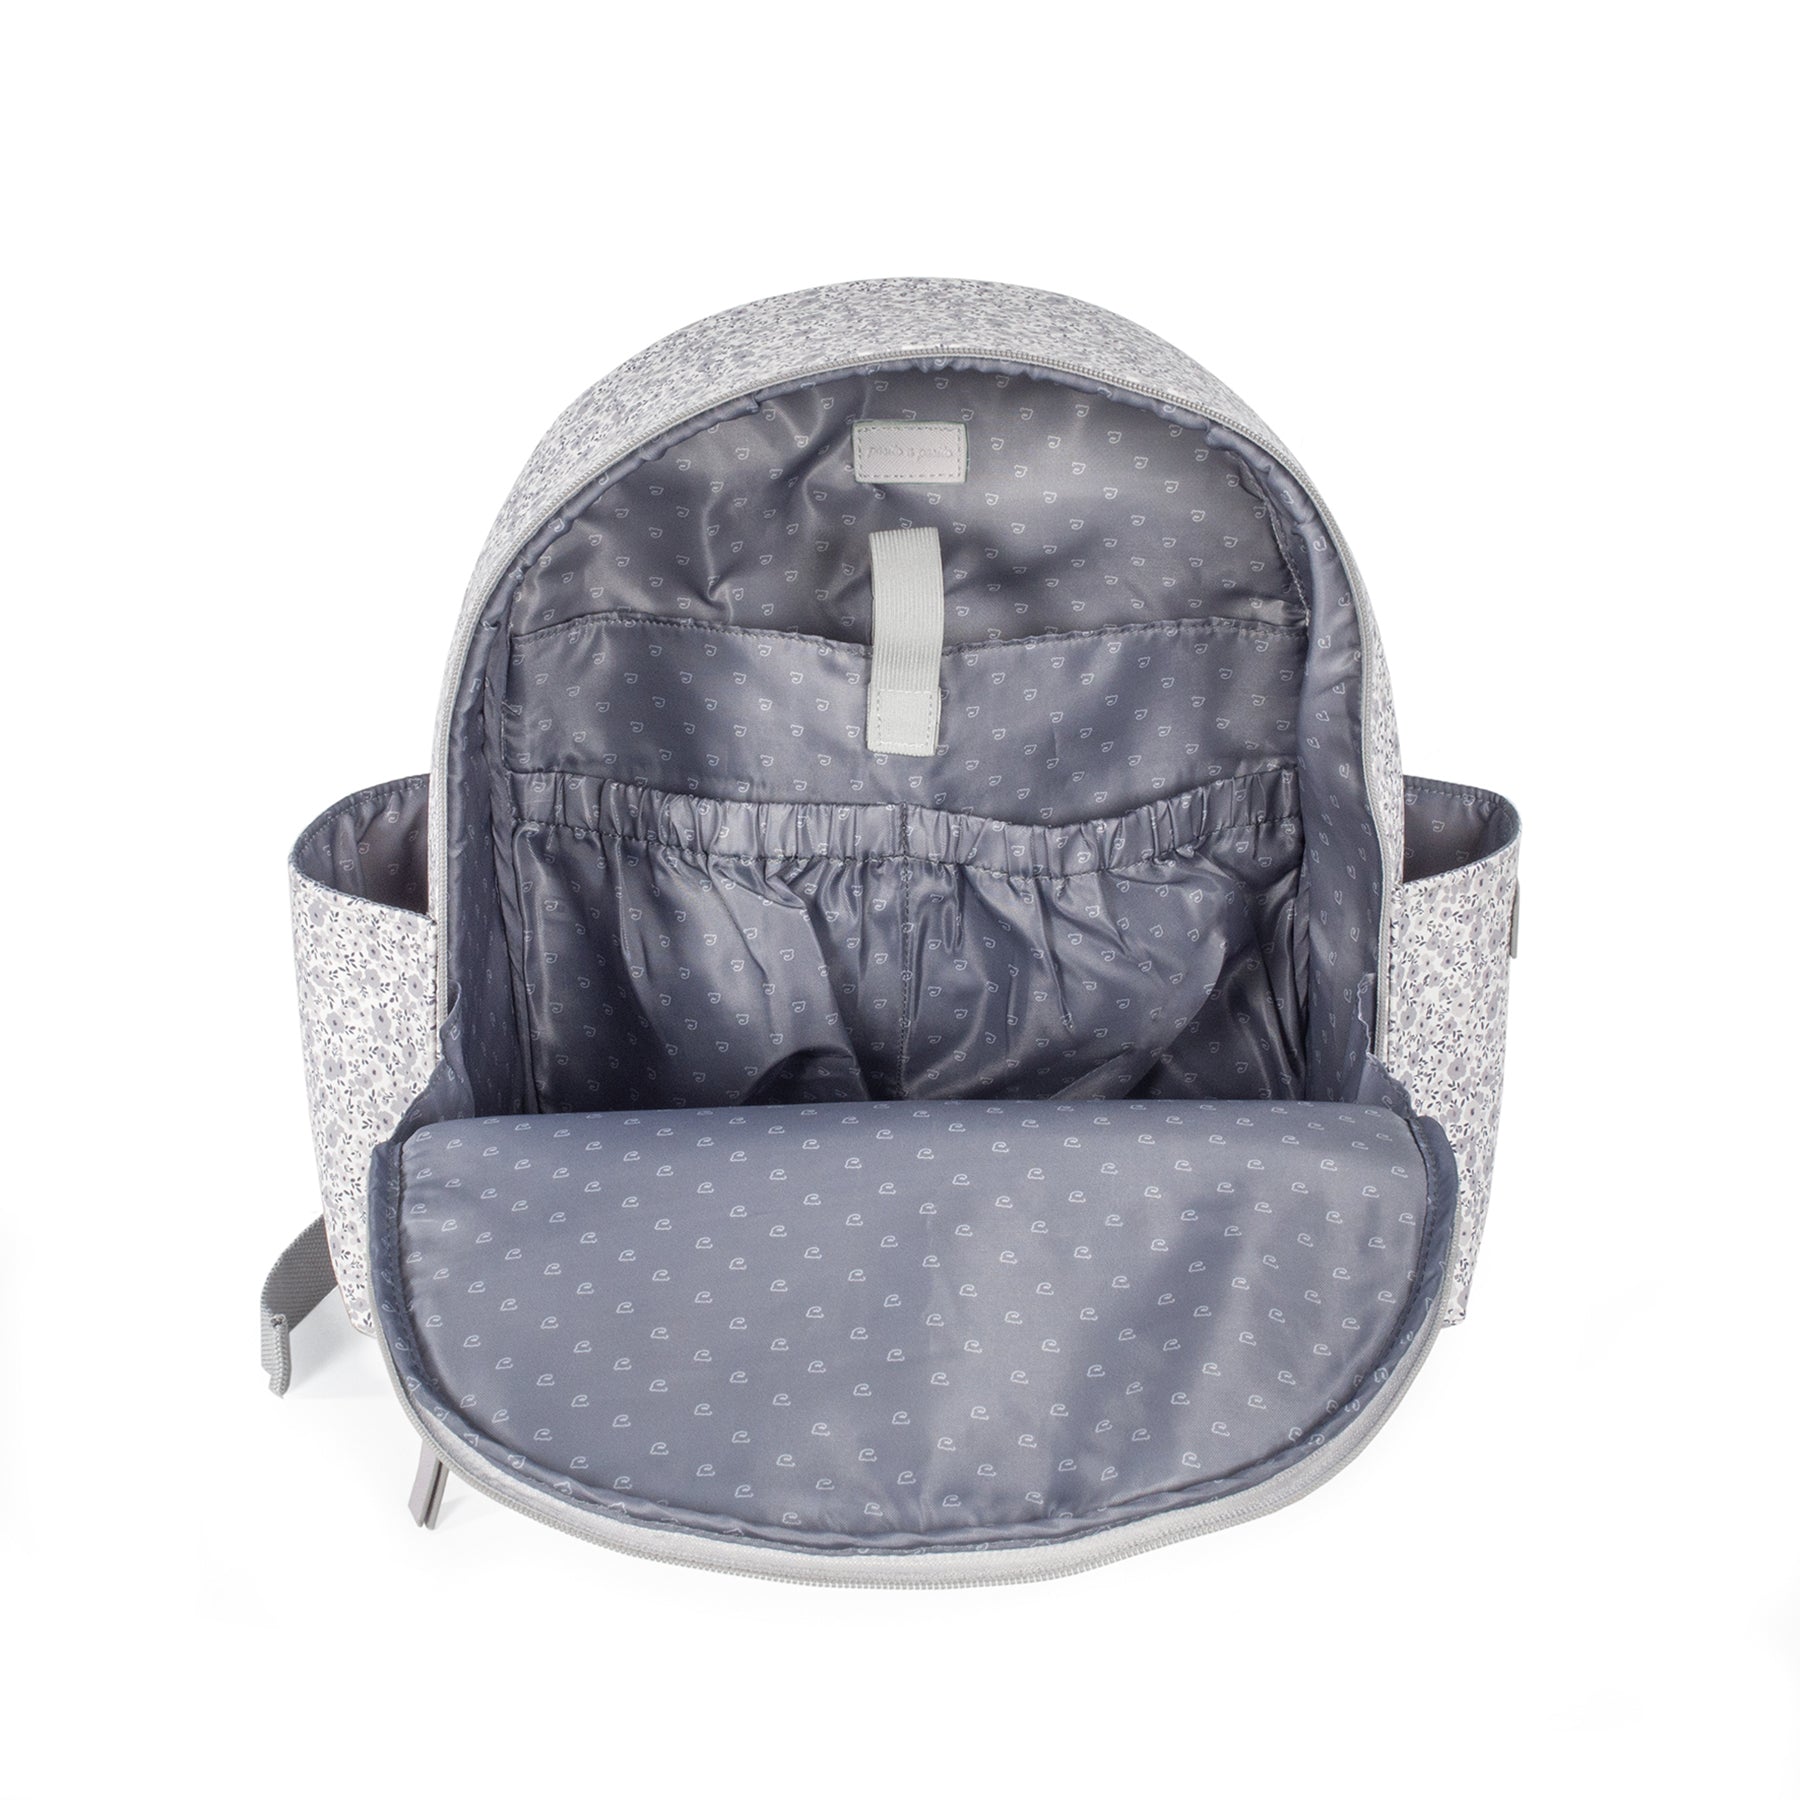 Pasito a Pasito Flower Mellow Grey Backpack Diaper Changing Bag